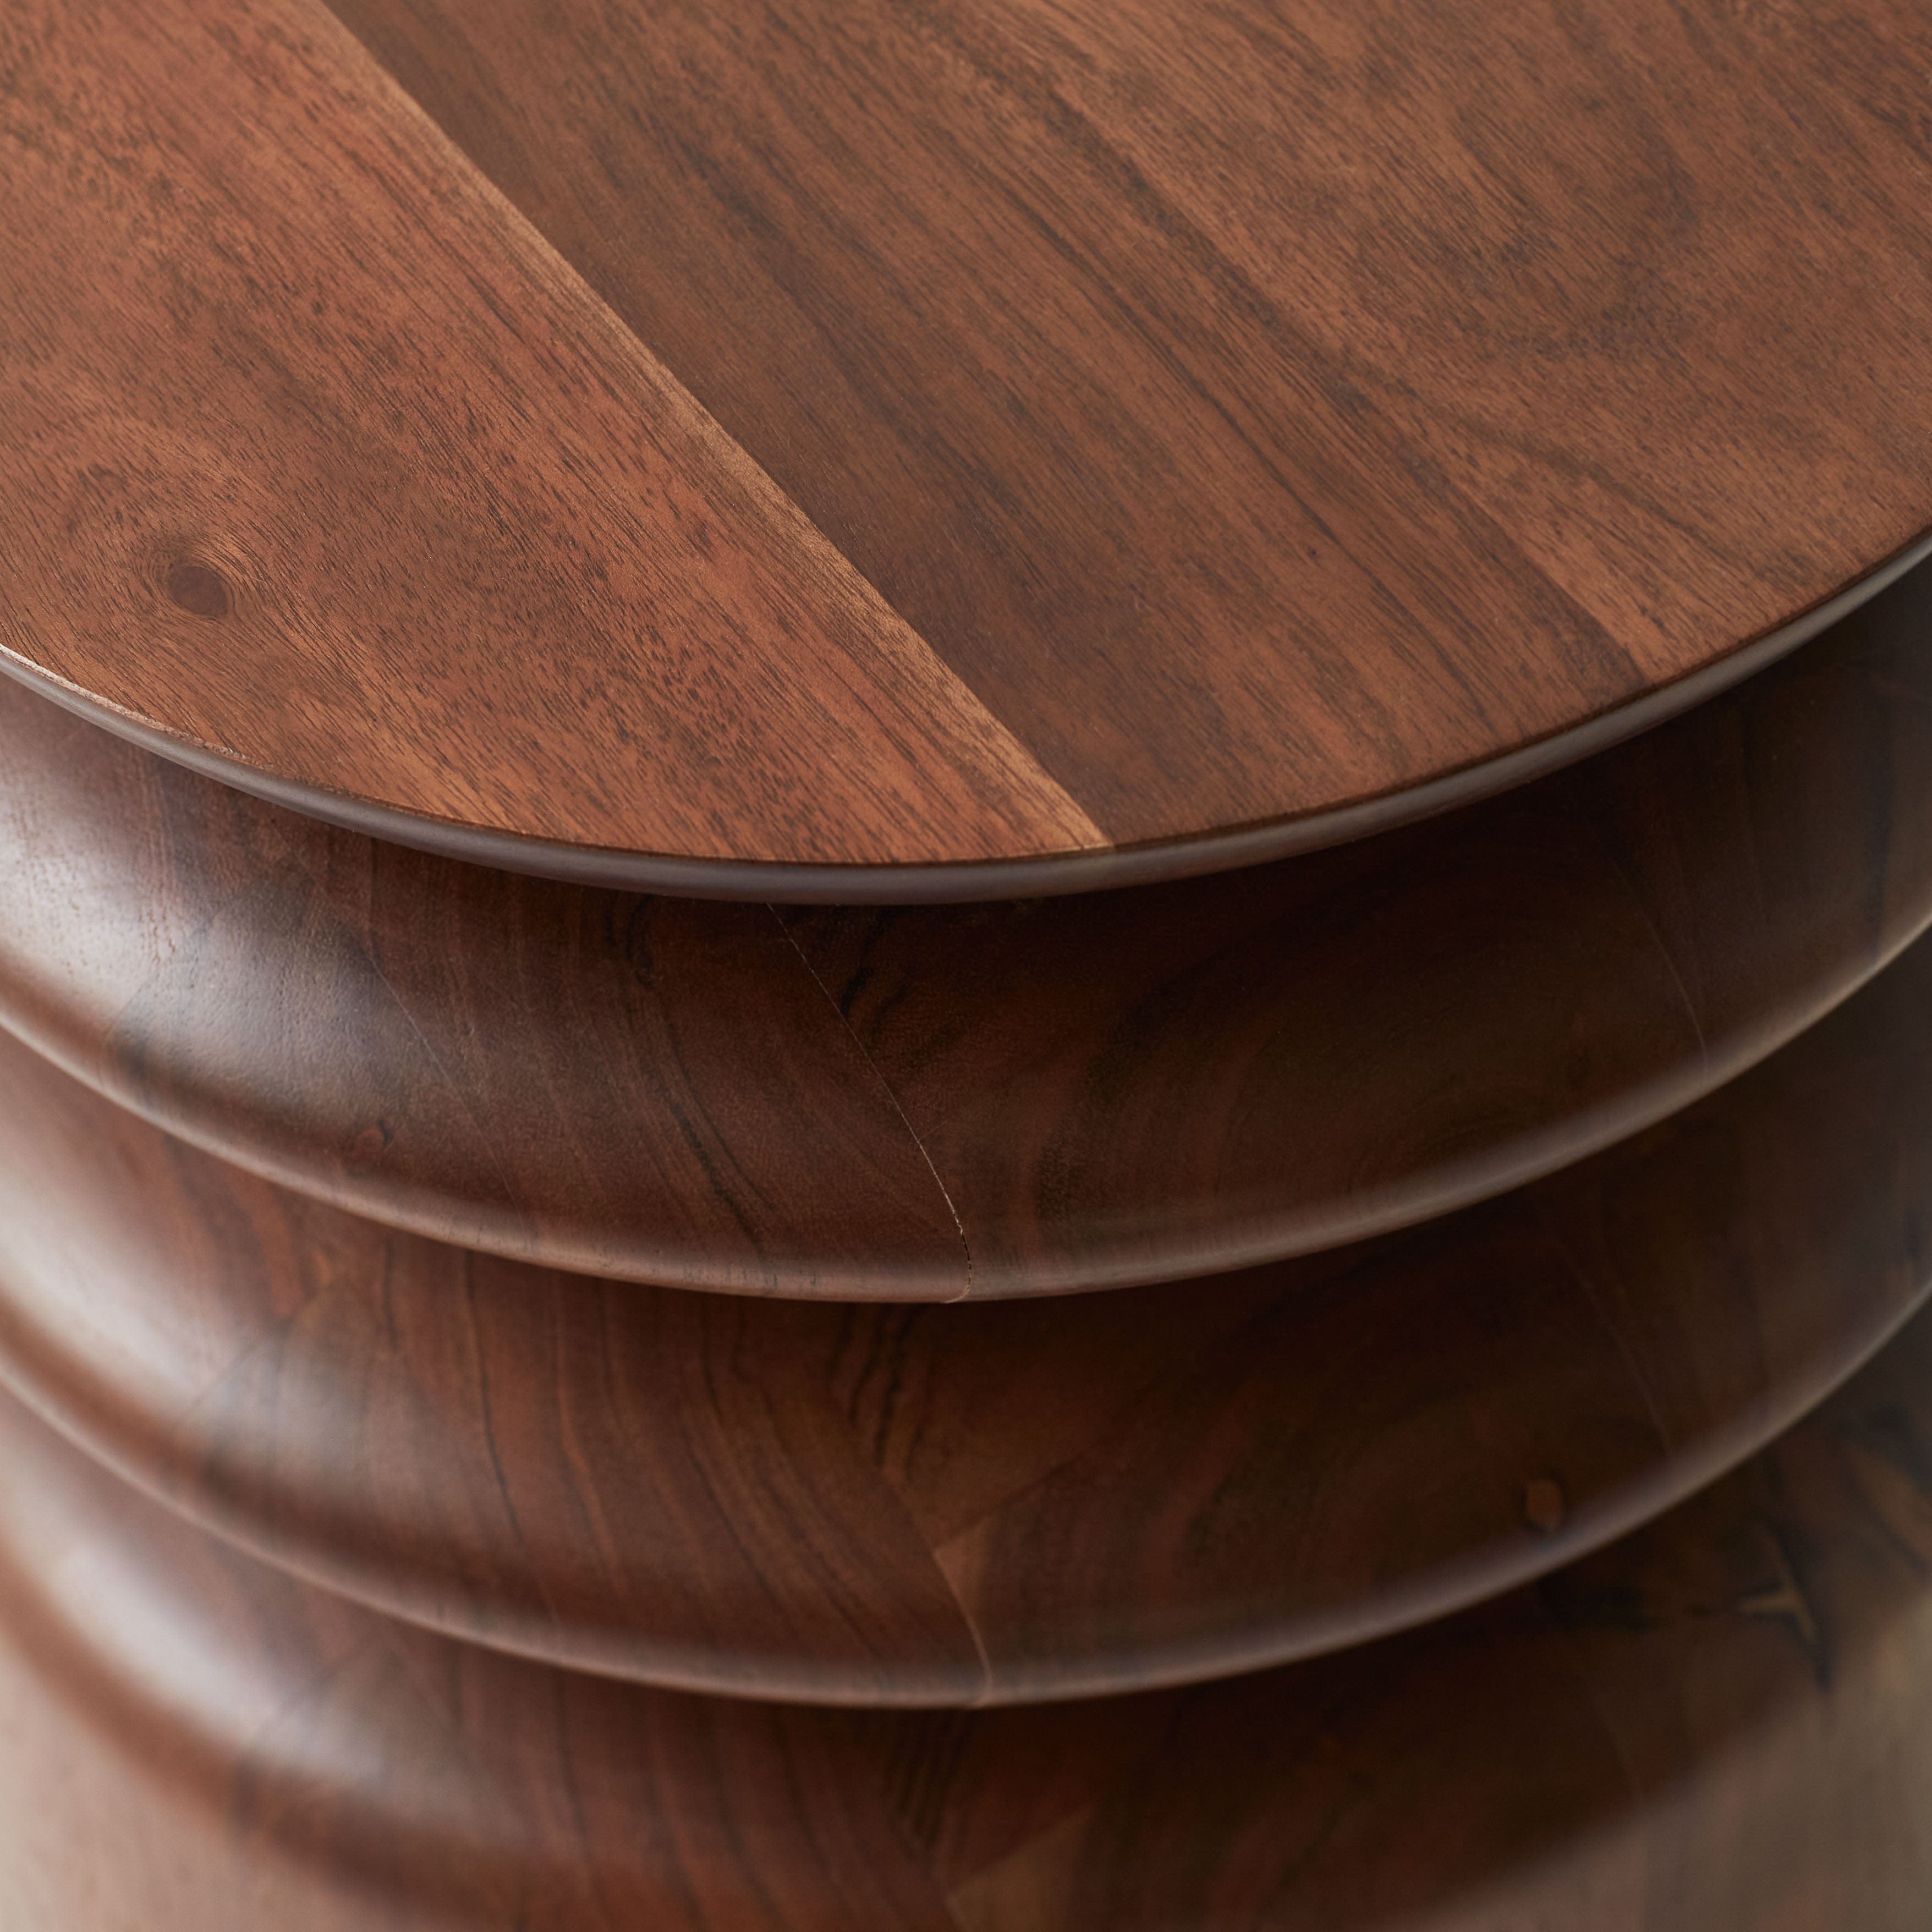 The Citizenry Mishka Wood Side Table - Image 2